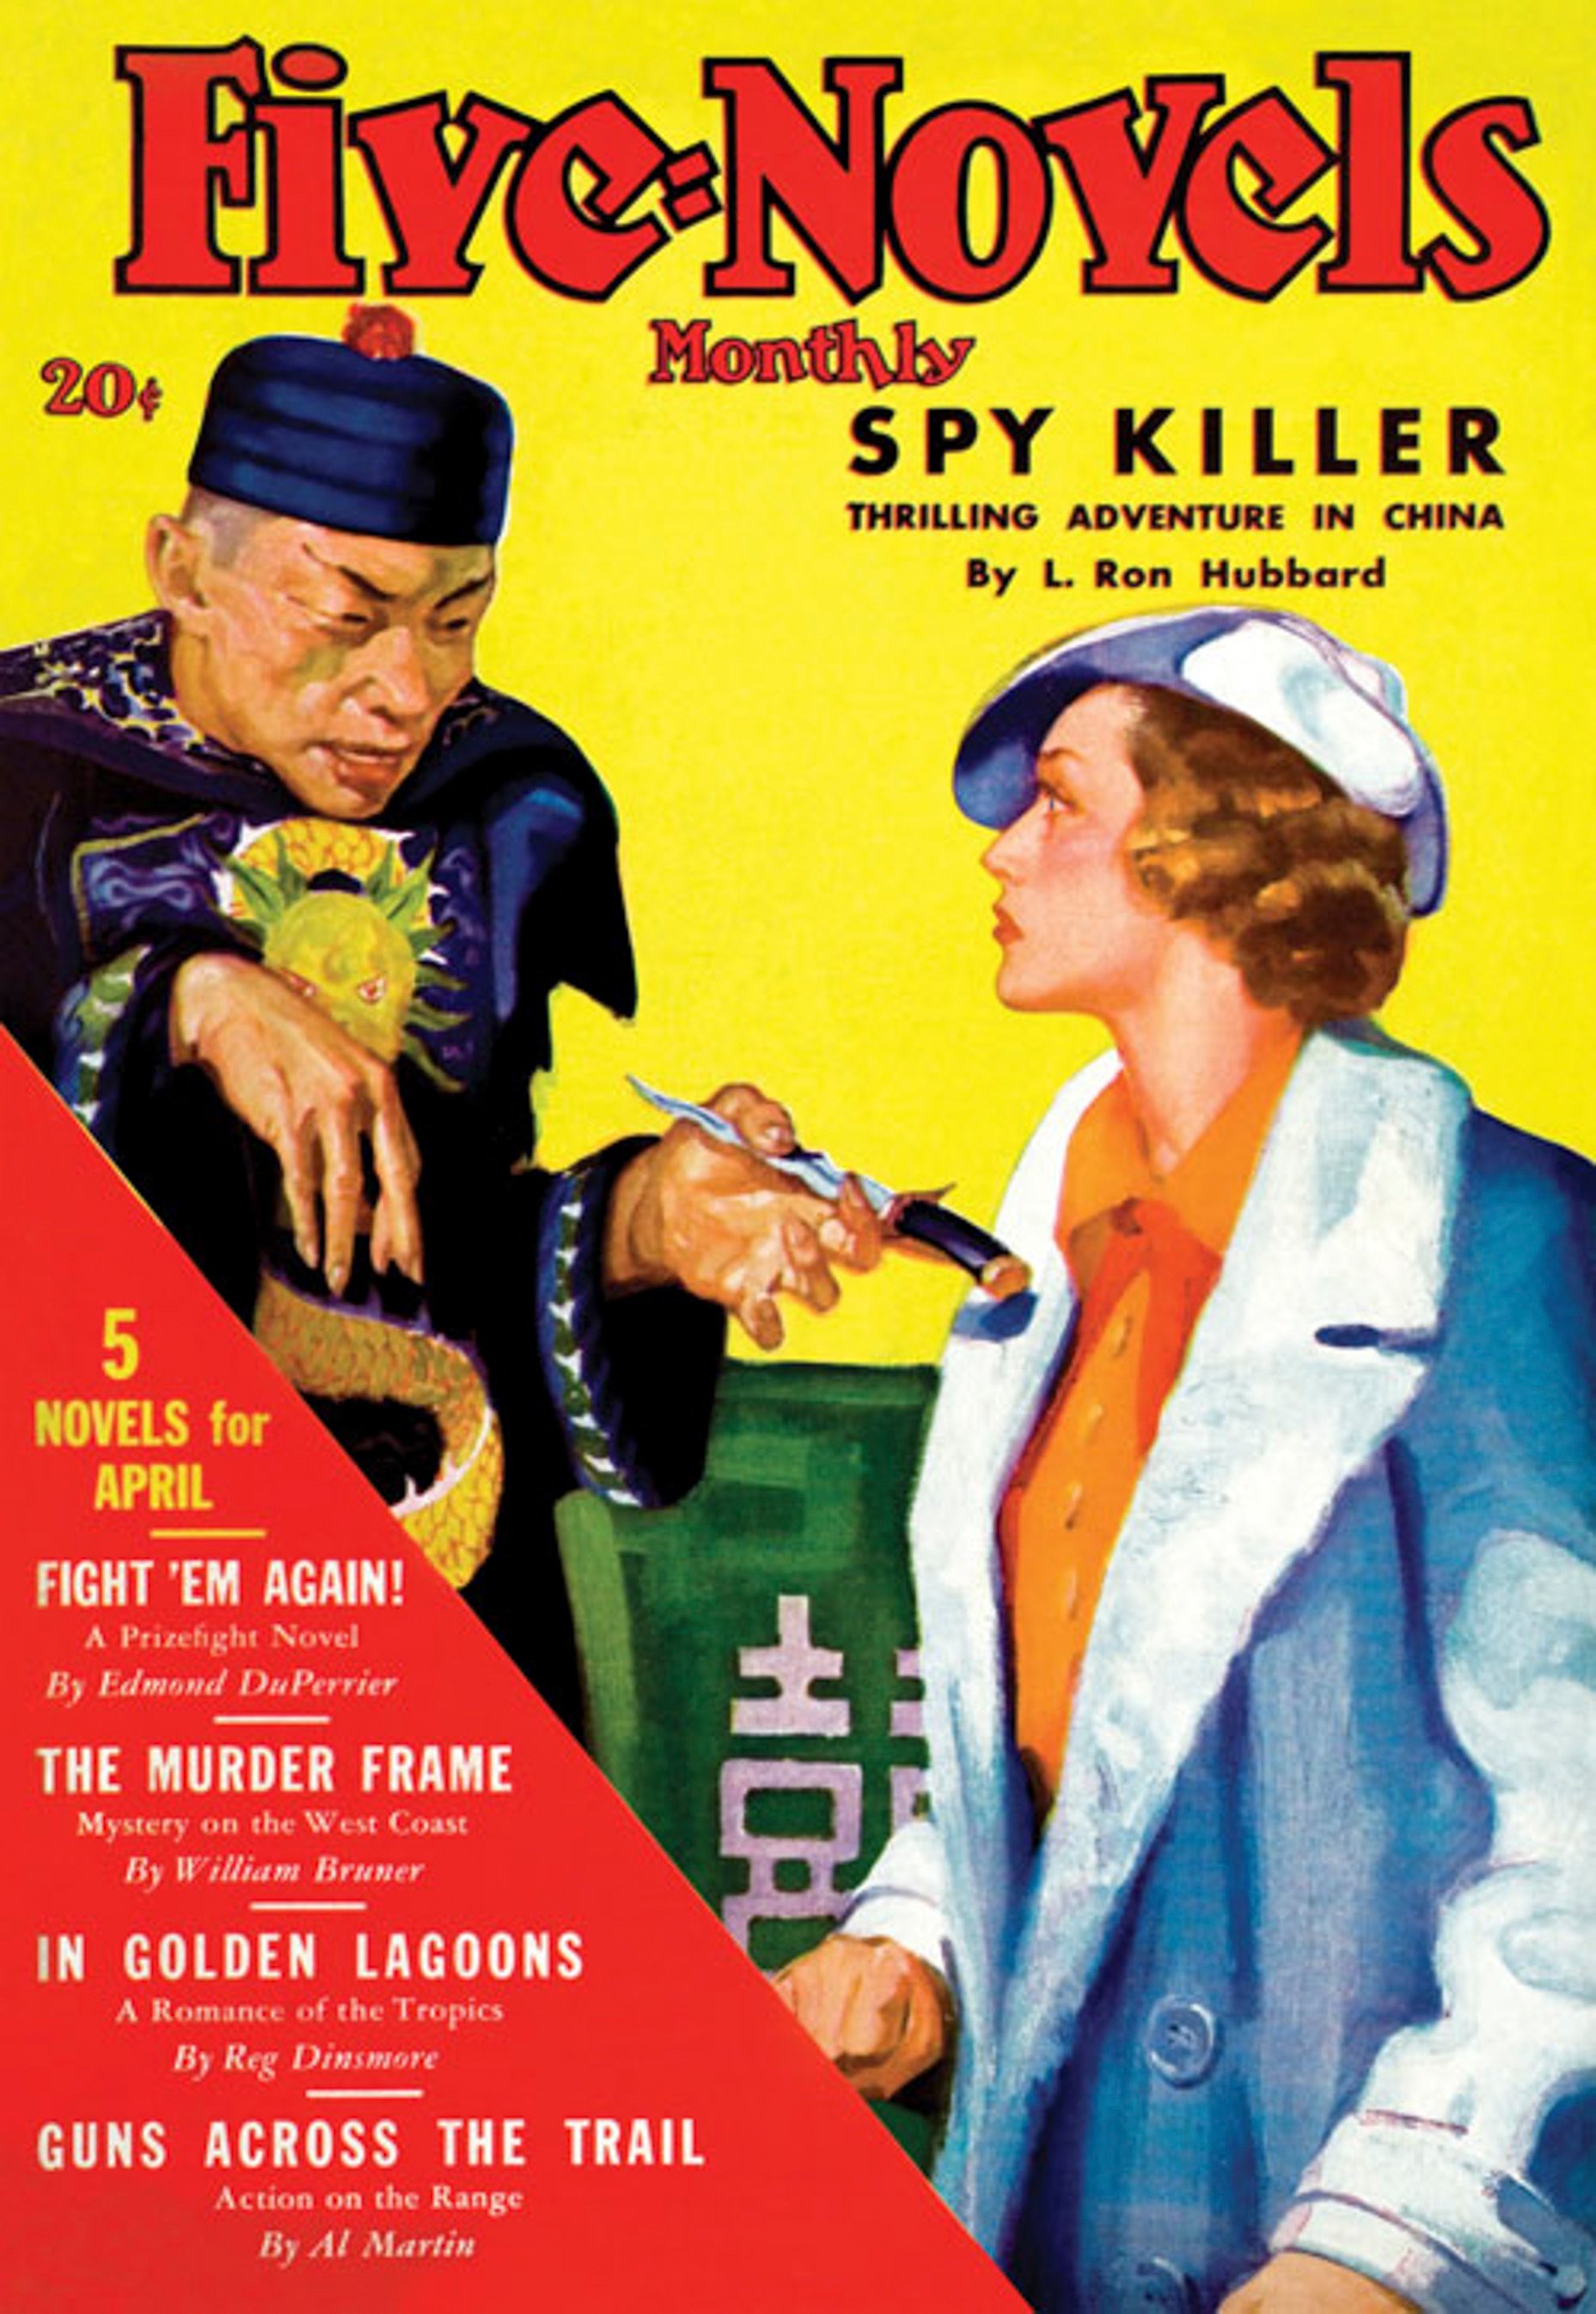 Handout image shows cover of Five Novels Monthly - April 1936 with story Spy Killer, Thrilling Adventure in China by L Ron Hubbard. In this fast-paced short novel of espionage and intrigue from pulp master Hubbard, Kurt Reid, bucko mate of the tanker Rangoon , jumps ship to avoid a murder rap. His goal is the city of Shanghai because “behind it lay all of China” and a fair chance for escape. Instantly, Reid is drawn into a plot involving a beautiful Russian spy, Varinka, and the sinister Gen. Lin Wang and his executioners known as “the Death Squad.”